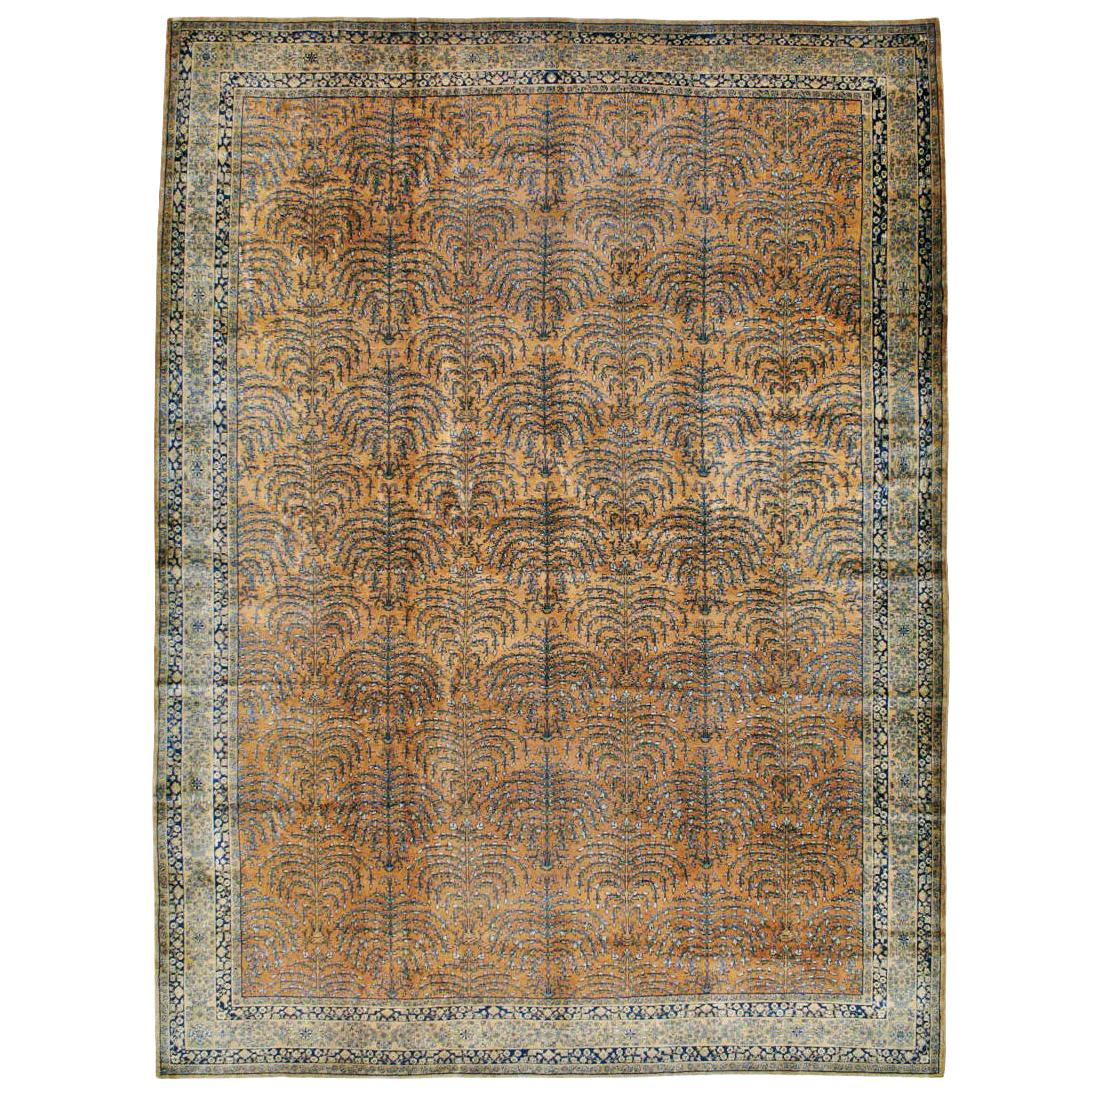 Antique Indian Lahore Room Size Rug